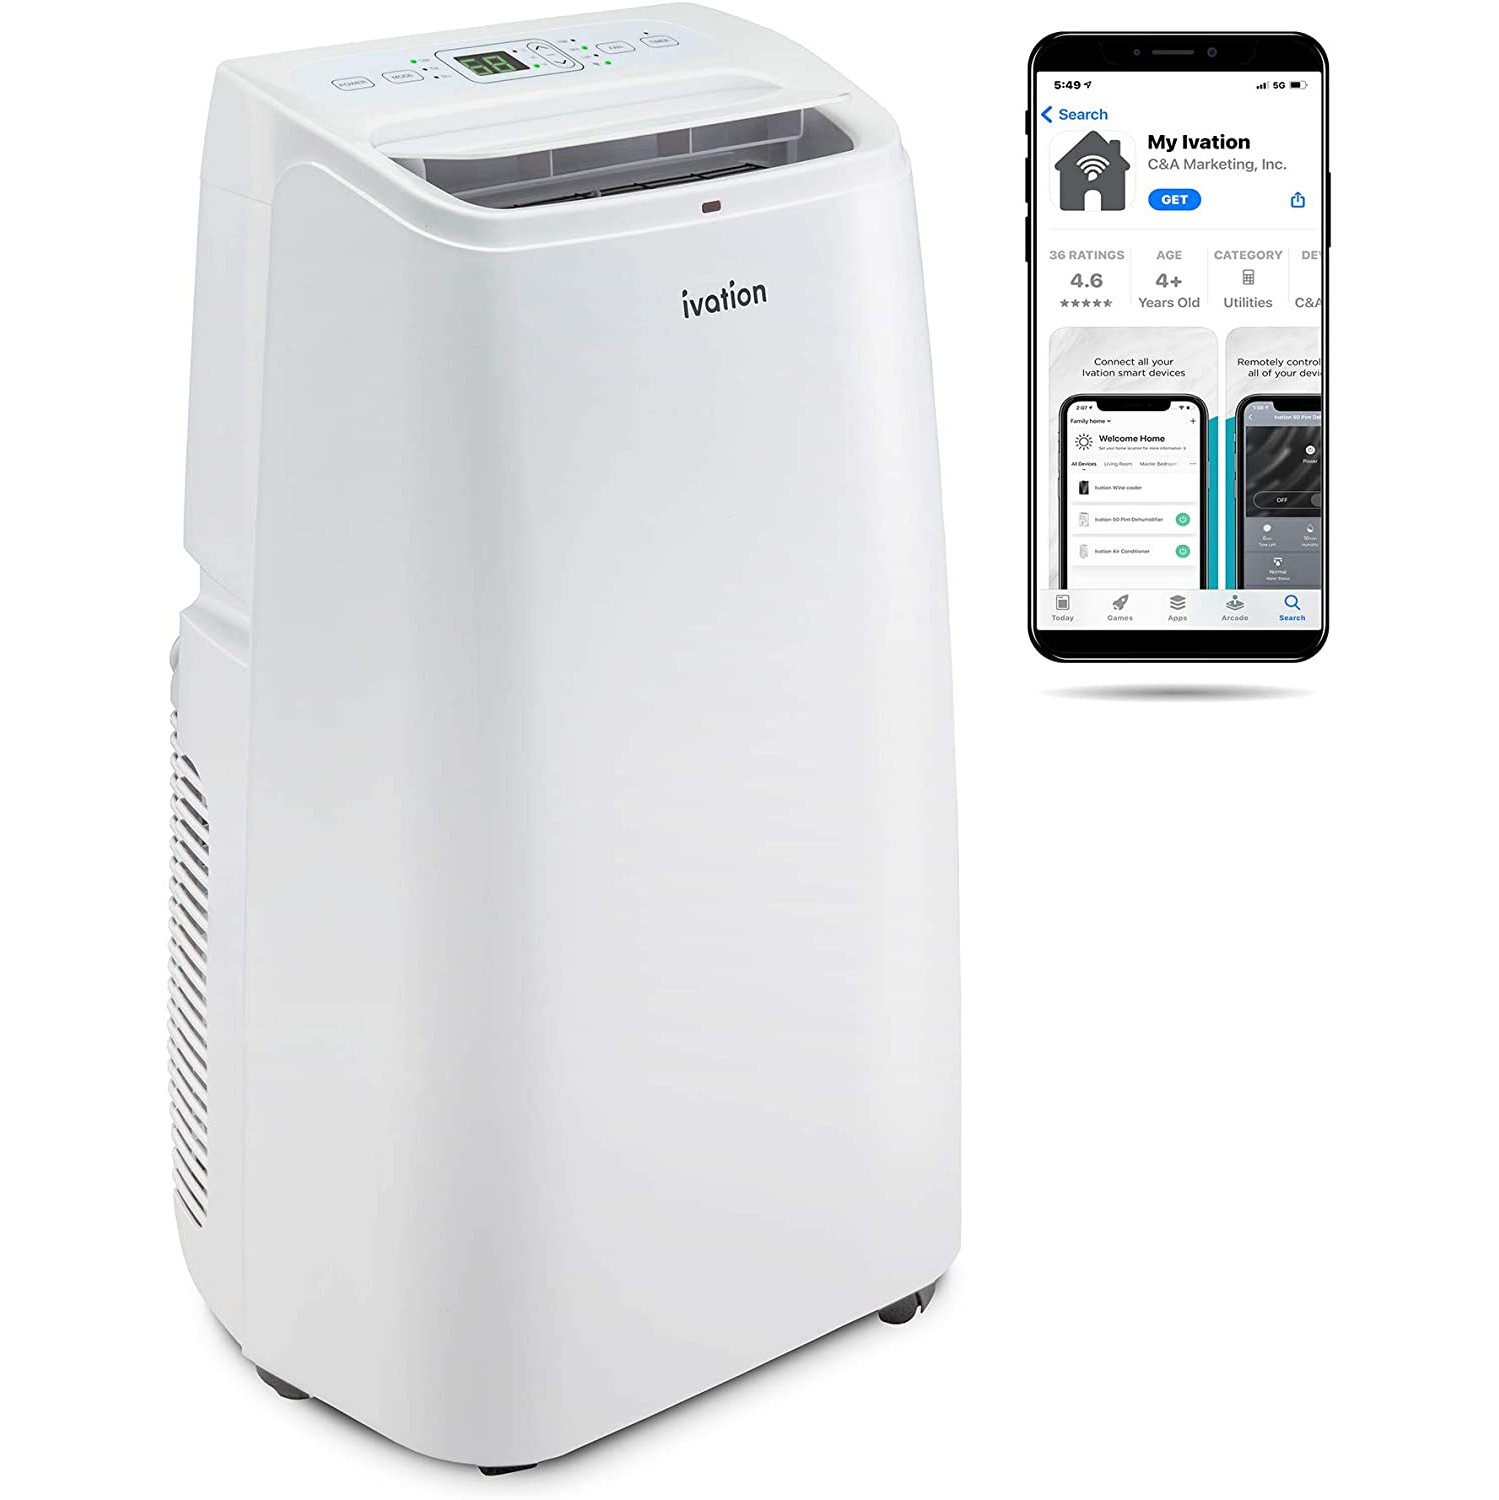 Ivation 10,000 BTU Portable Air Conditioner with Wi-Fi for Rooms Up to 350 Sq Ft (6,500 BTU SACC) 3-in-1 Smart App Control Cooling System, Dehumidifier and Fan with Remote, Exhaust